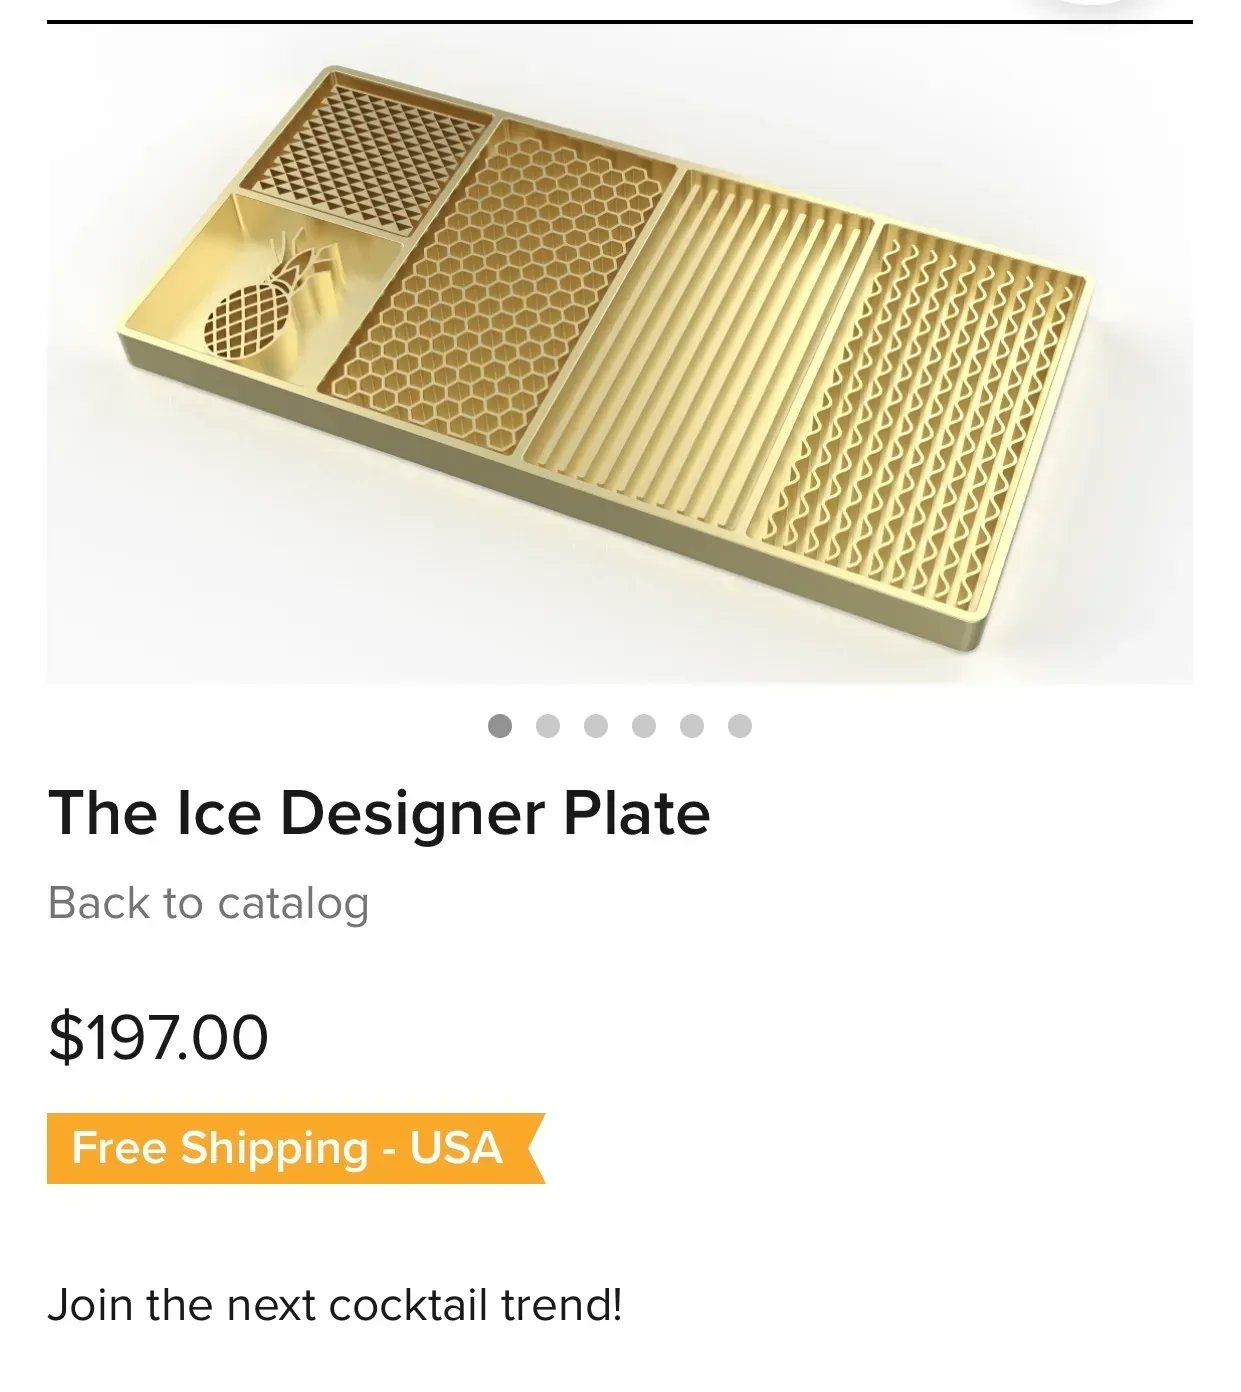 Phil Kollin on X: This Ice Designer Plate product seems… A) Kinda cool  (especially watching videos of the tray in action) B) That it involves a  fair amount of work just to